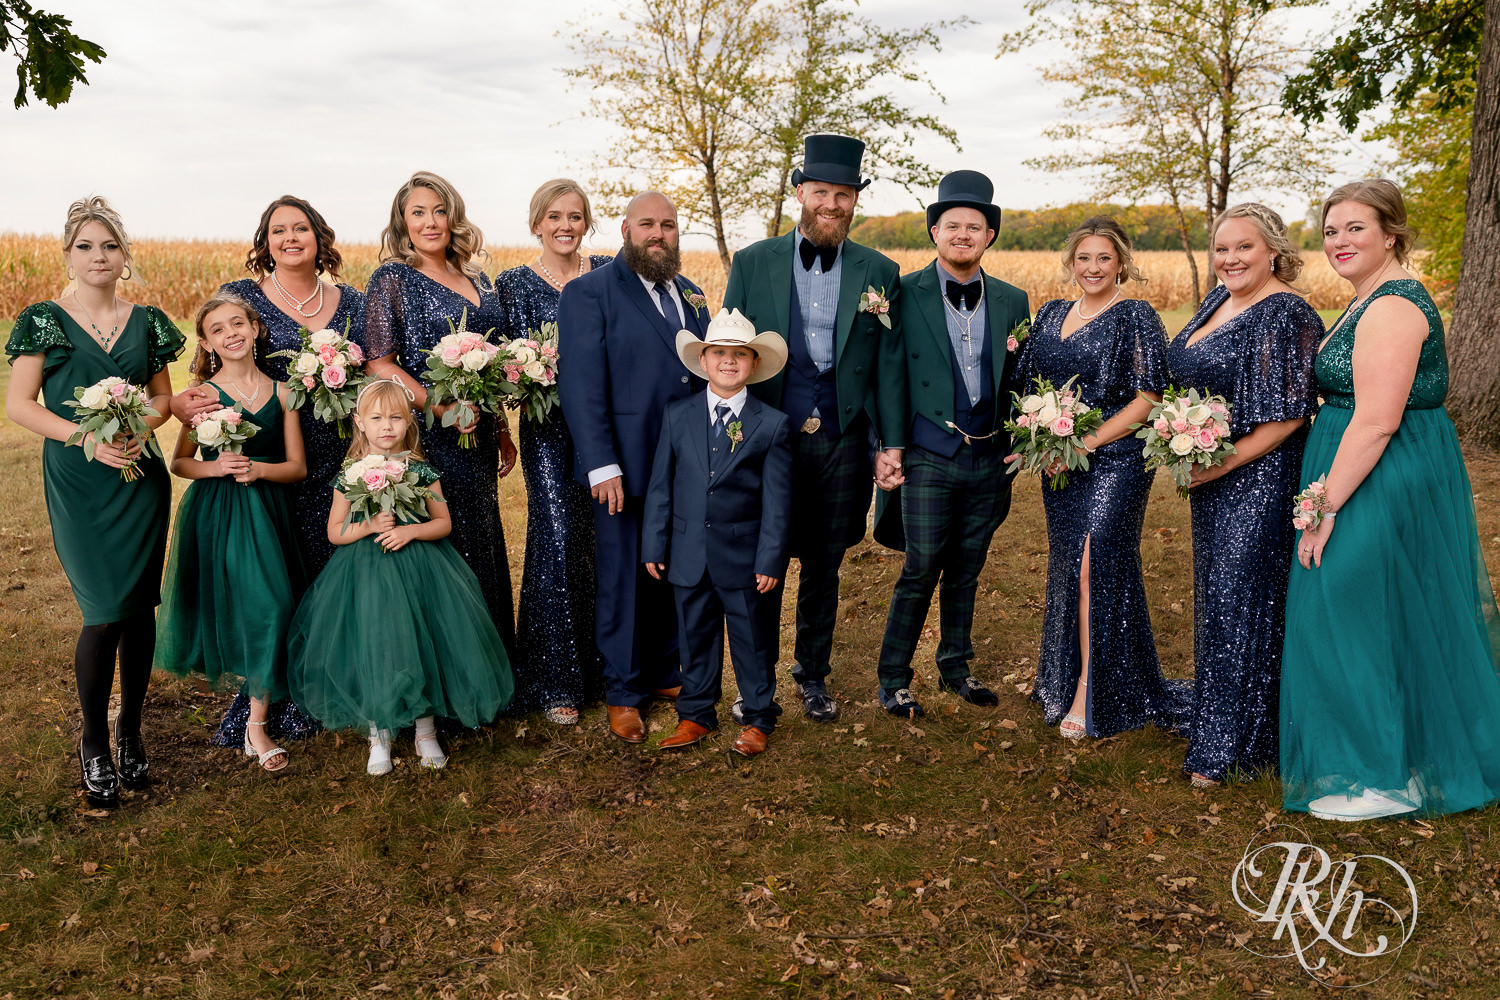 Gay wedding party with grooms wearing tophats and bridesmaids wearing sequin dresses.